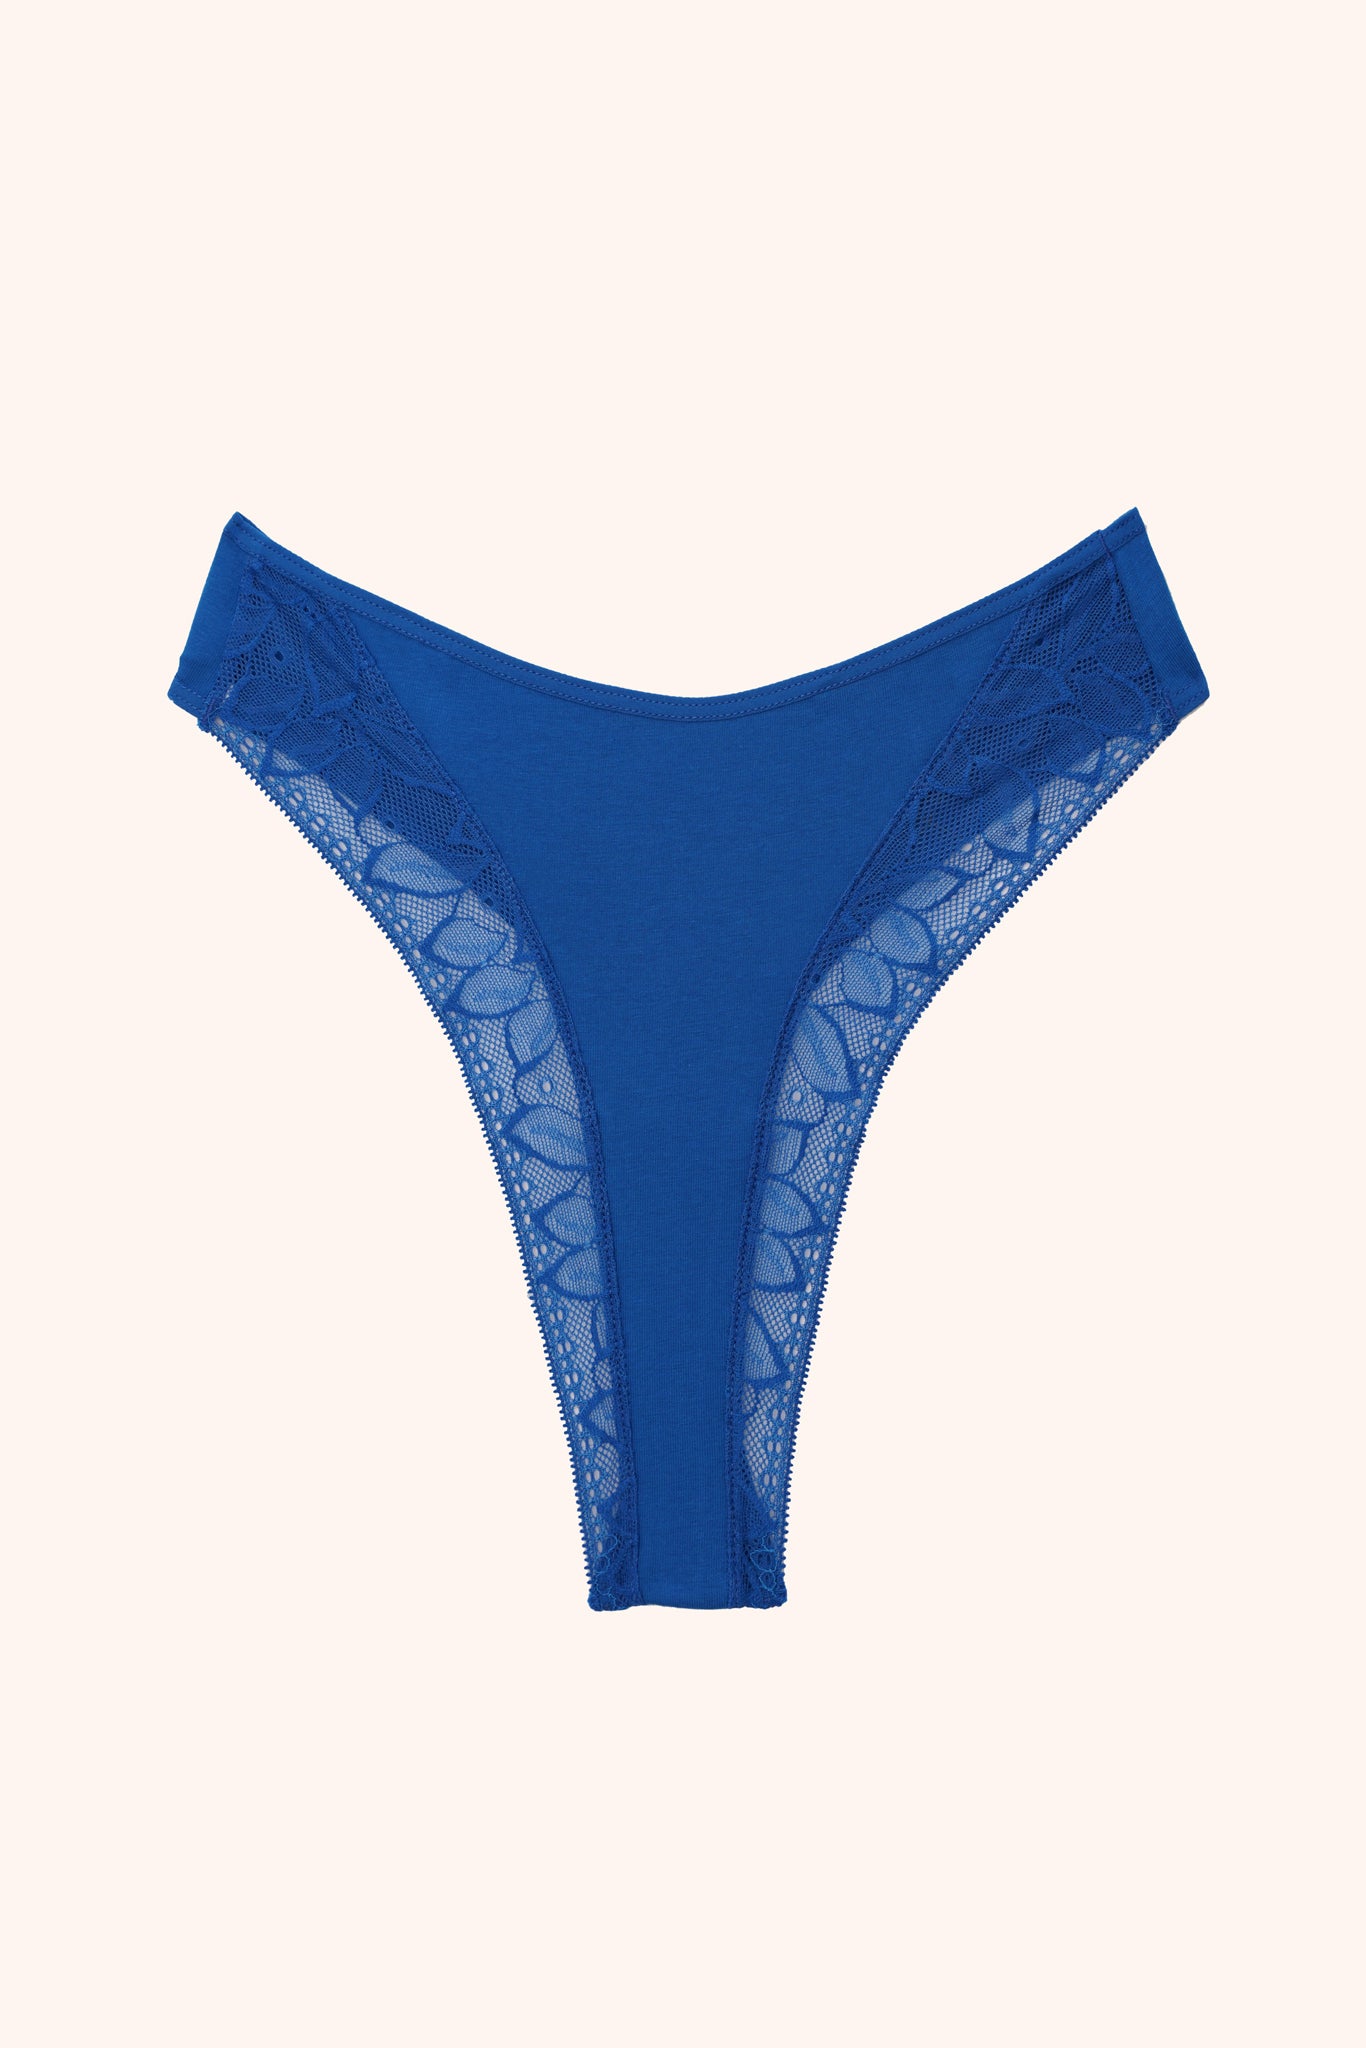 Willow thong - blue